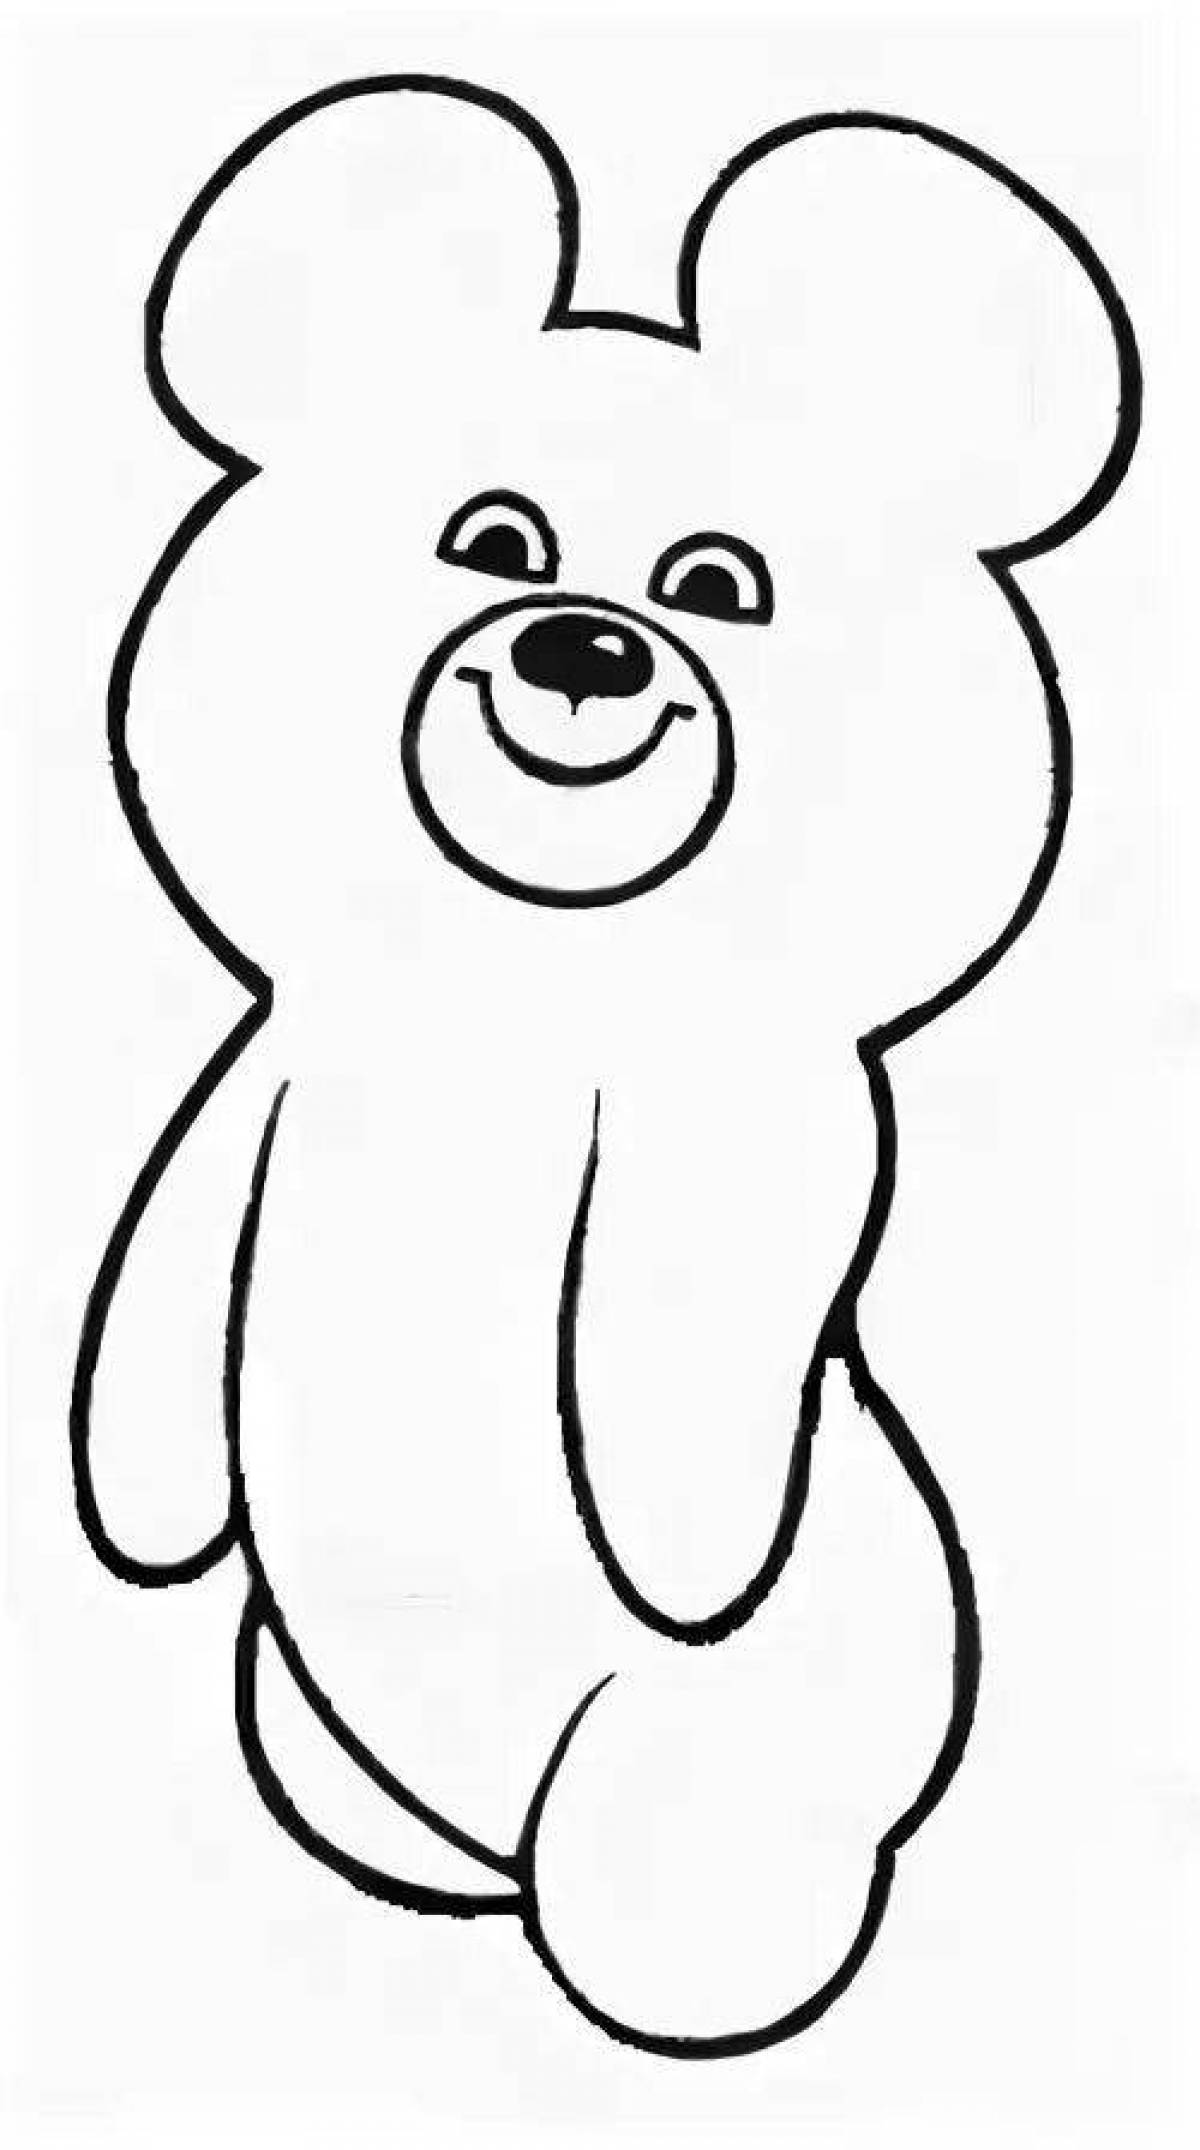 Olympic teddy bear coloring page